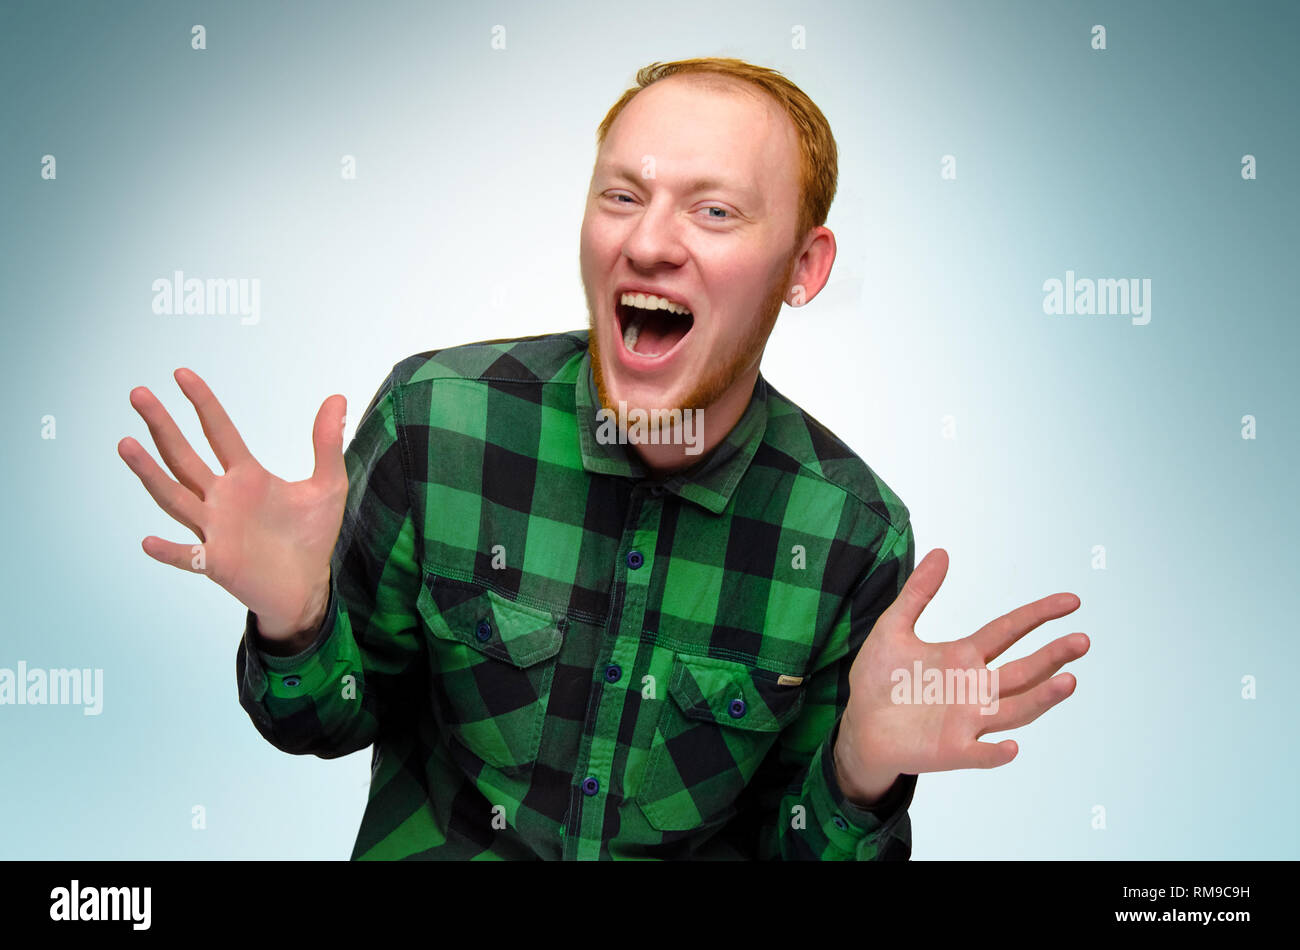 portrait of red haired happy man show his hands. caucasian teenager maked surprise. redhead guy scream and laughs. reaction to surprise is overjoyed shock. emotion is glad. confident, funny boy smile Stock Photo